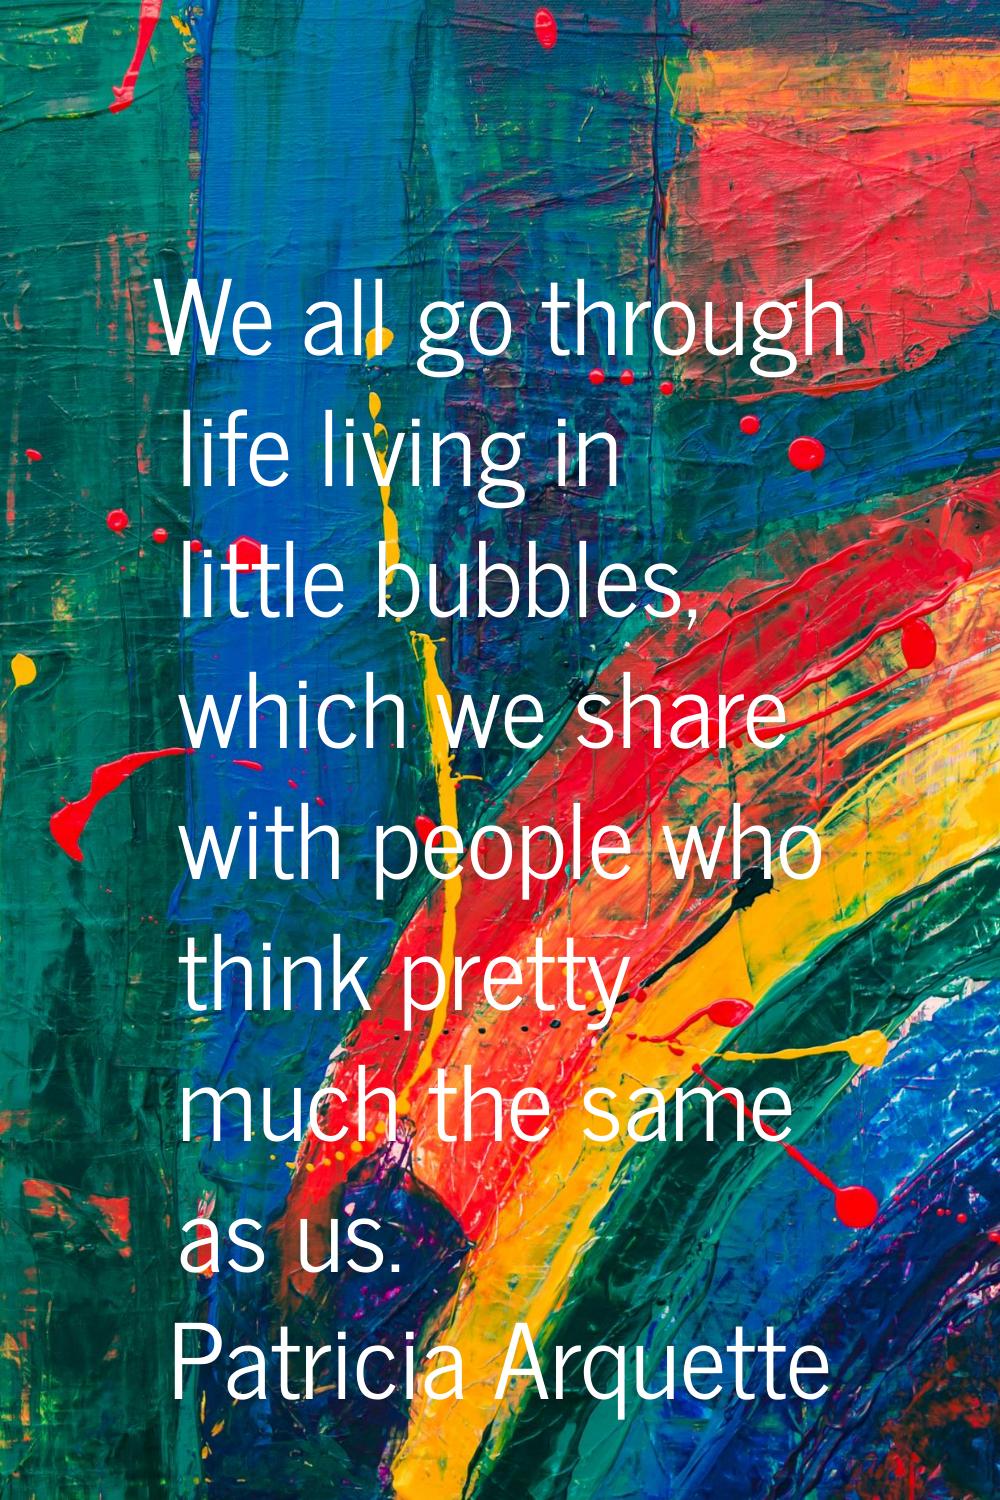 We all go through life living in little bubbles, which we share with people who think pretty much t